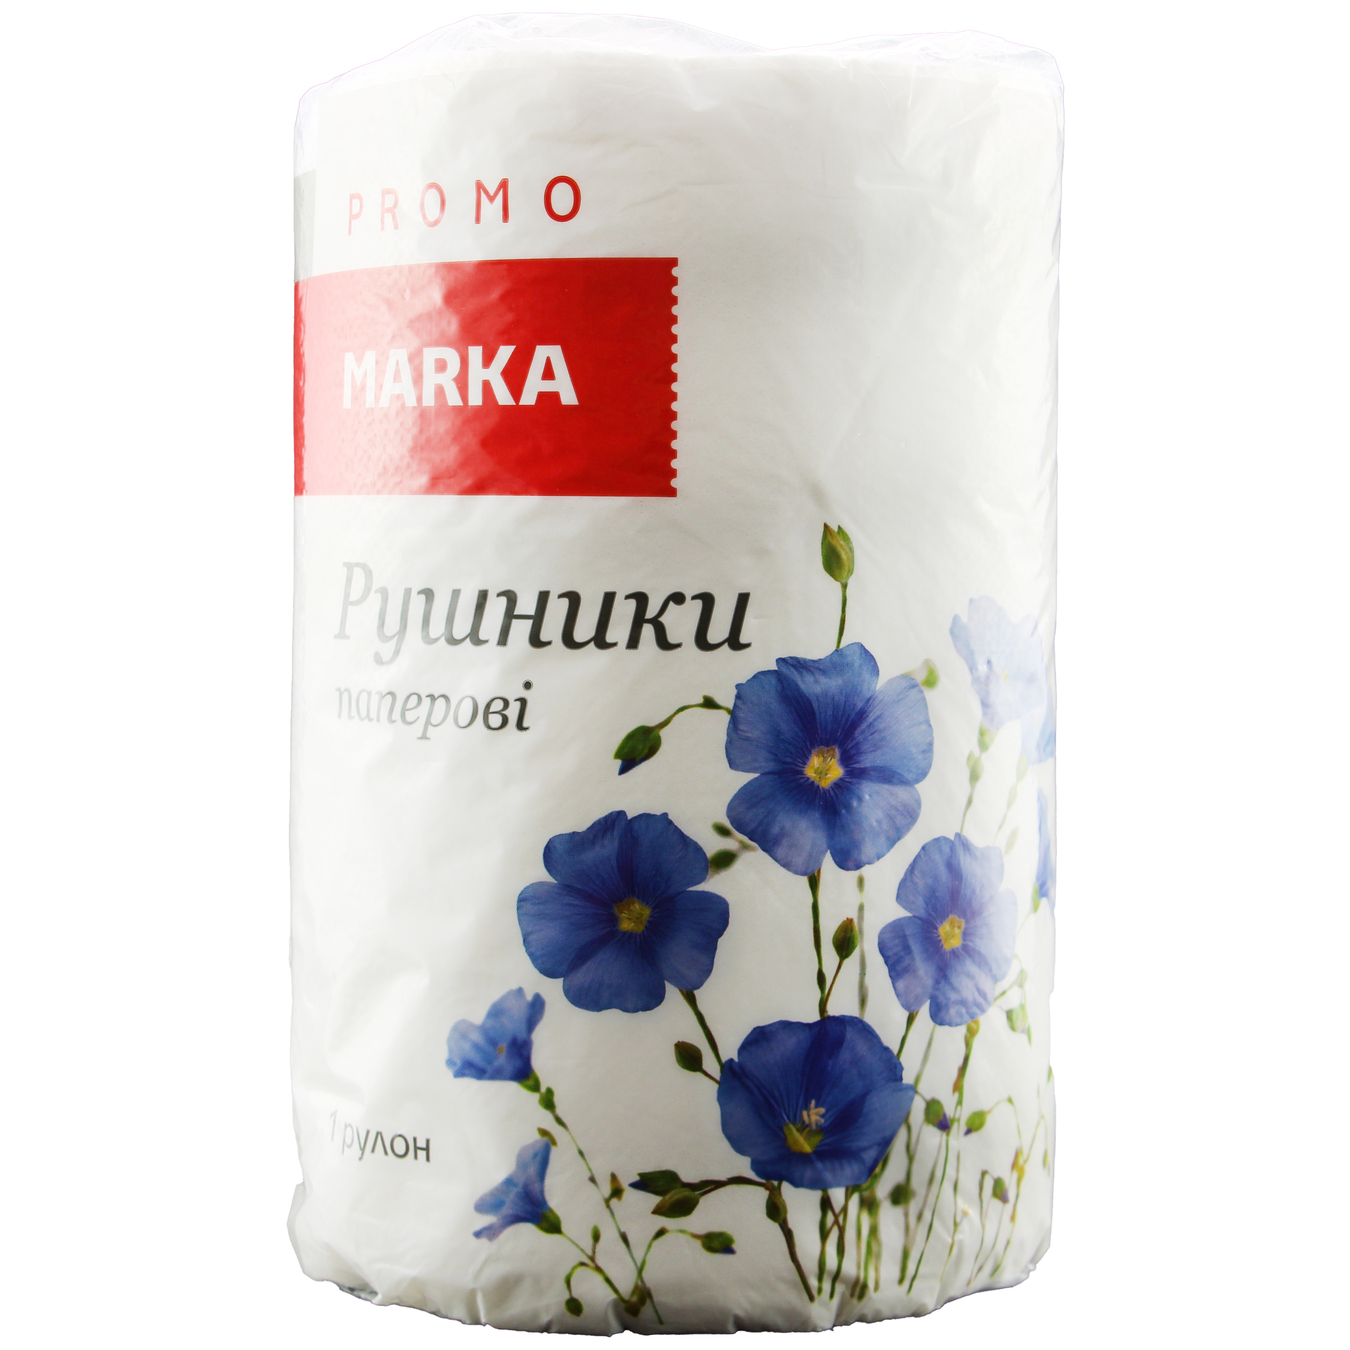 Marka Promo 2-Ply Paper Towels 1 Roll